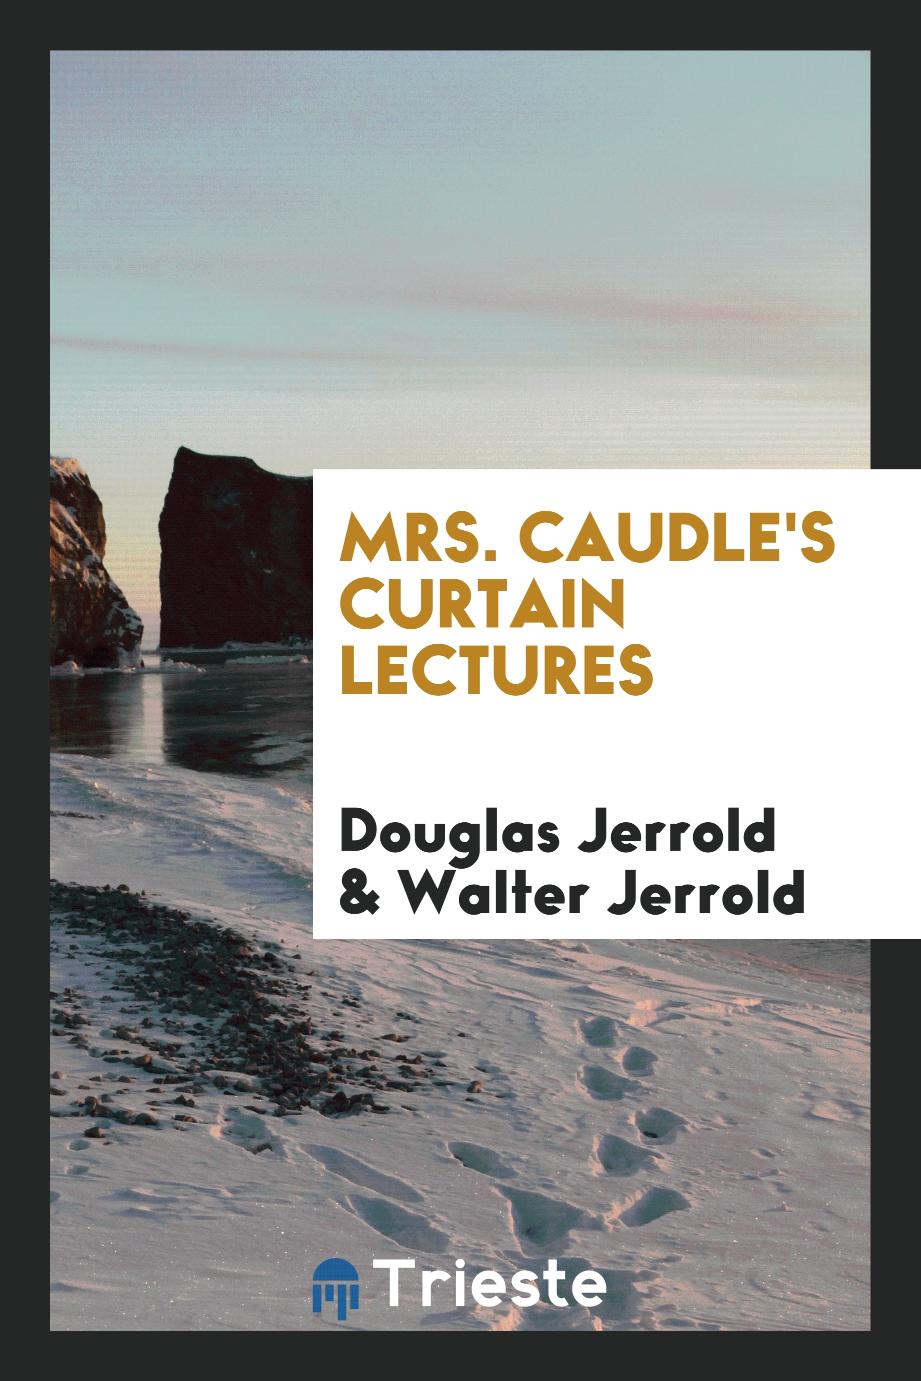 Mrs. Caudle's curtain lectures